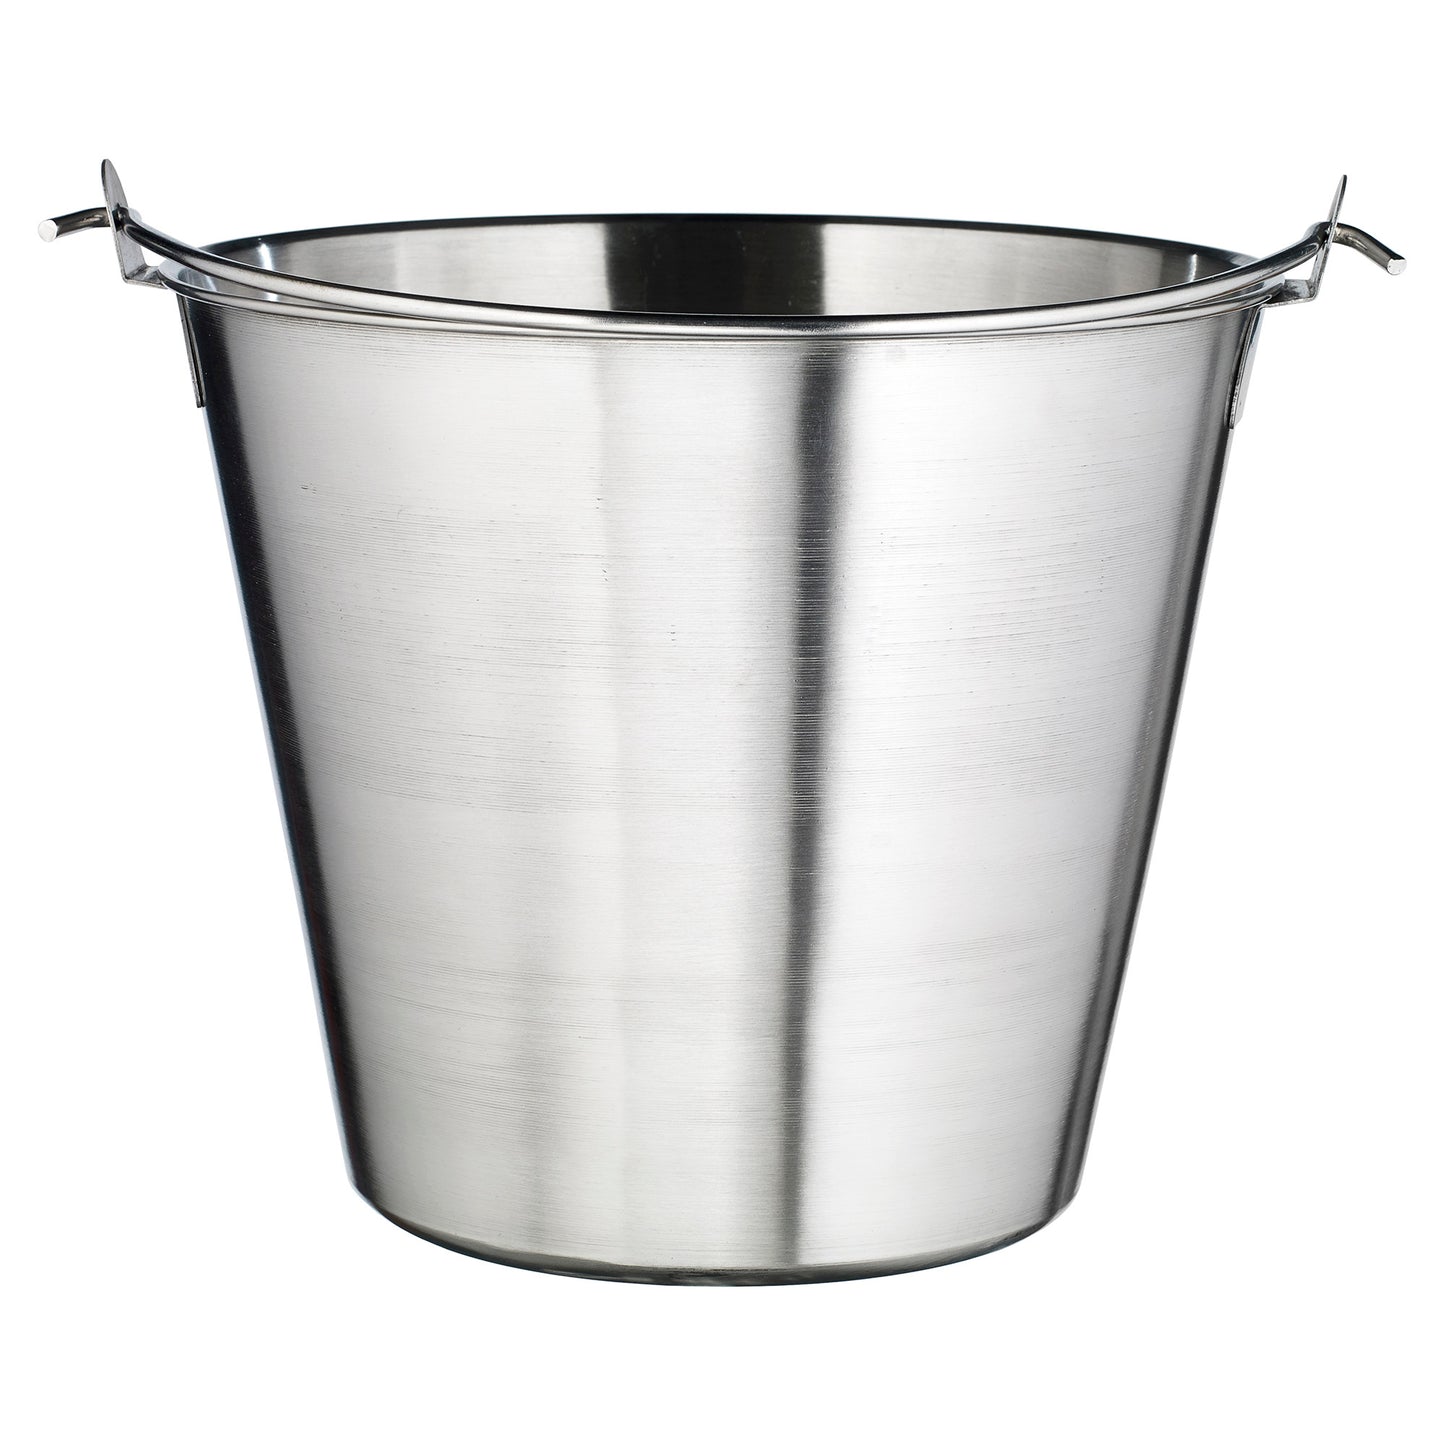 UP-13 - Utility Pail, 13 Quart, Stainless Steel